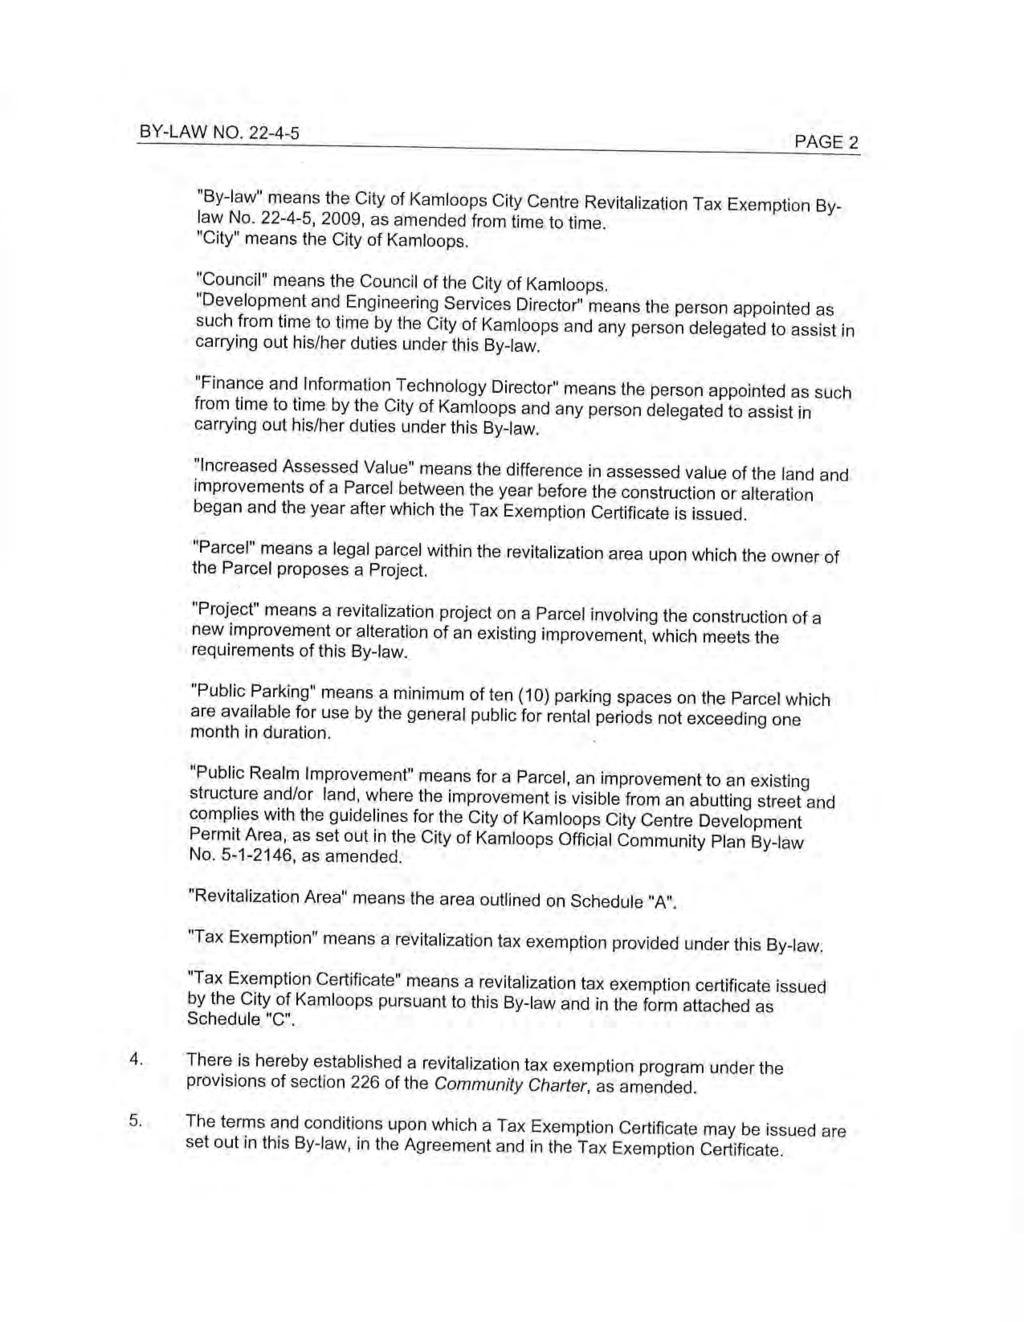 BY-LAW NO. 22-4-5 PAGE 2 "By-law" means the City of Kamloops City Centre Revitalization Tax Exemption Bylaw No. 22-4-5, 2009, as amended from time to time. "City" means the City of Kamloops.